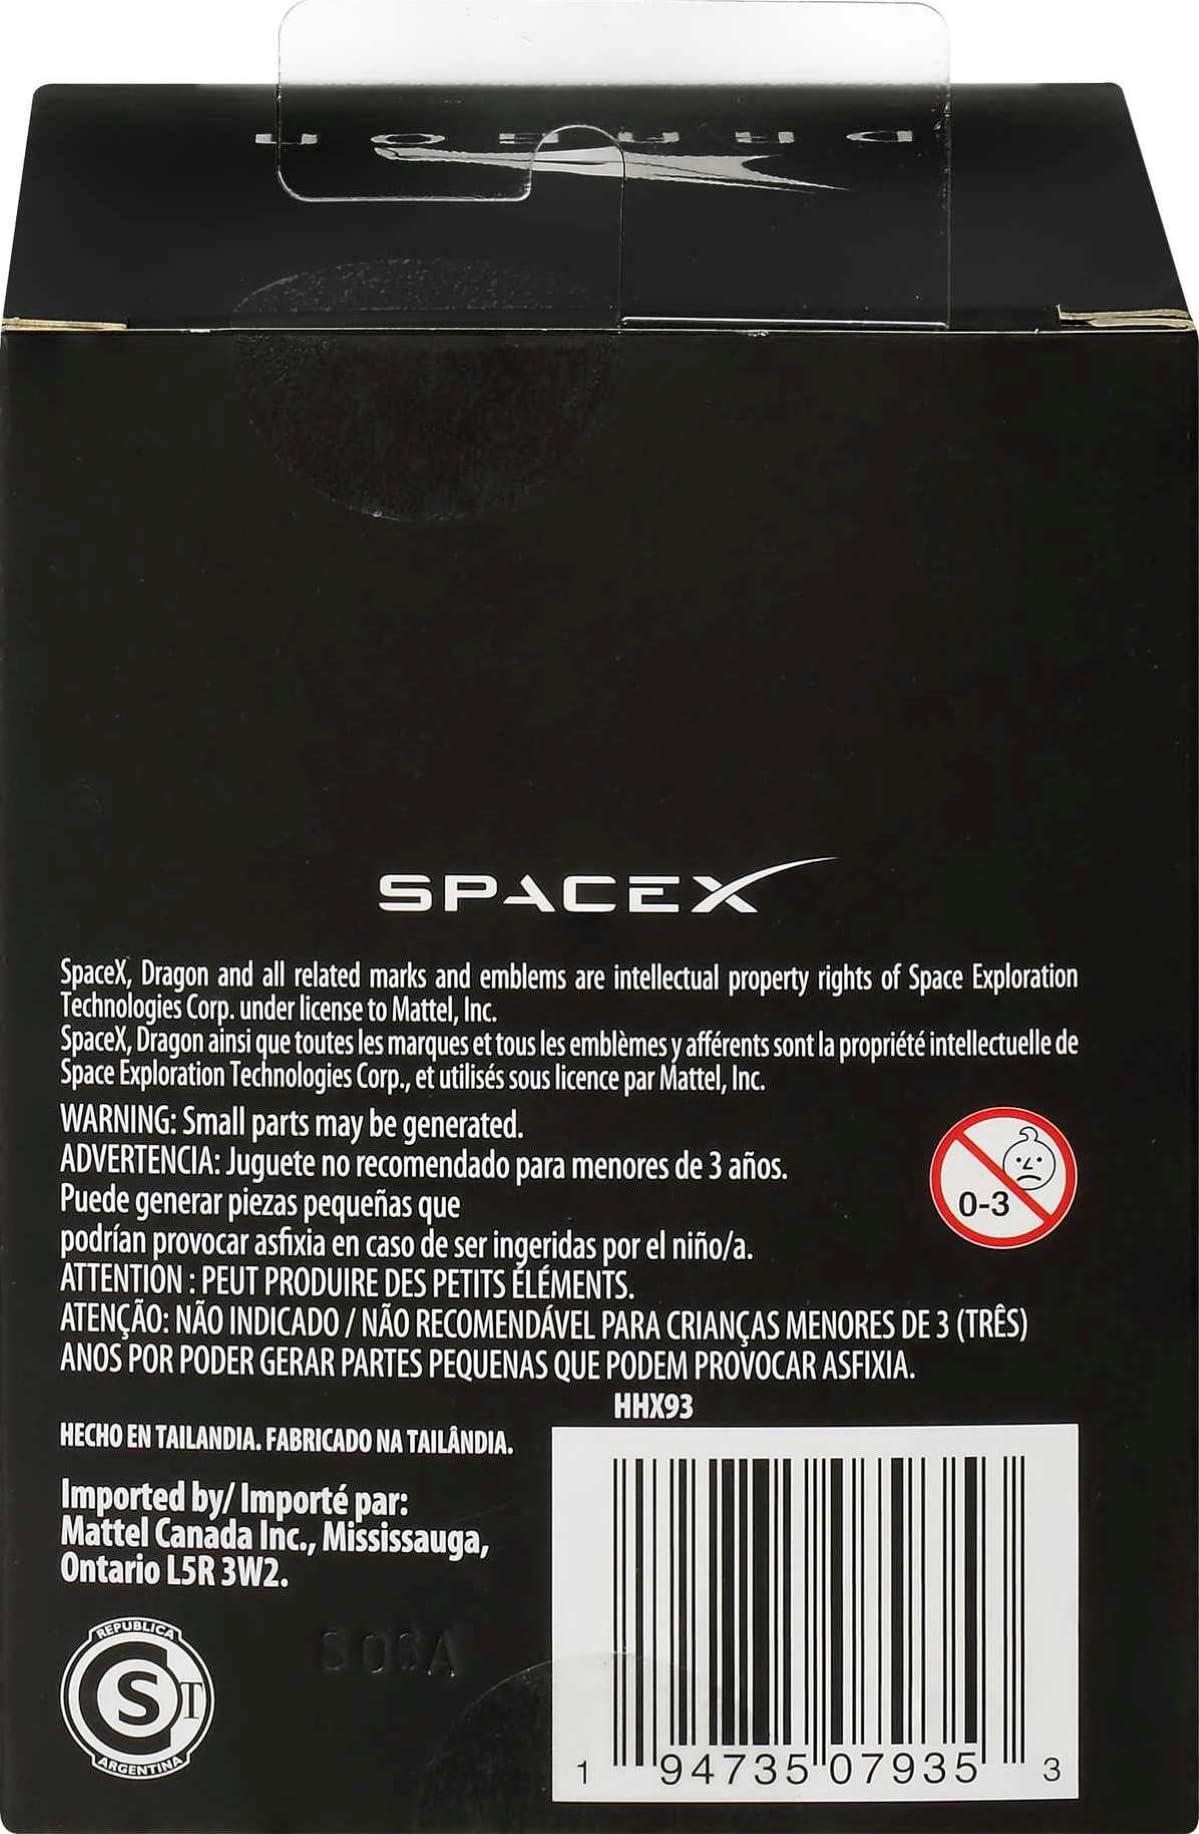 Matchbox SpaceX Dragon Spacecraft, Premium Die-Cast Replica Vehicle with Collectible Packaging